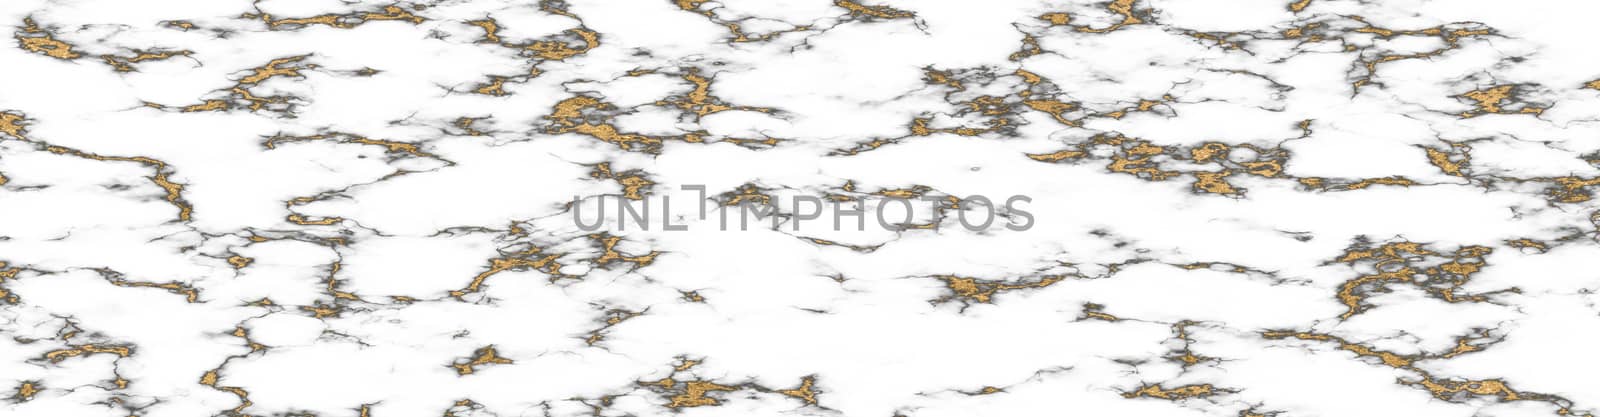 panorama black white marble and gold mineral texture luxury interior wall tile